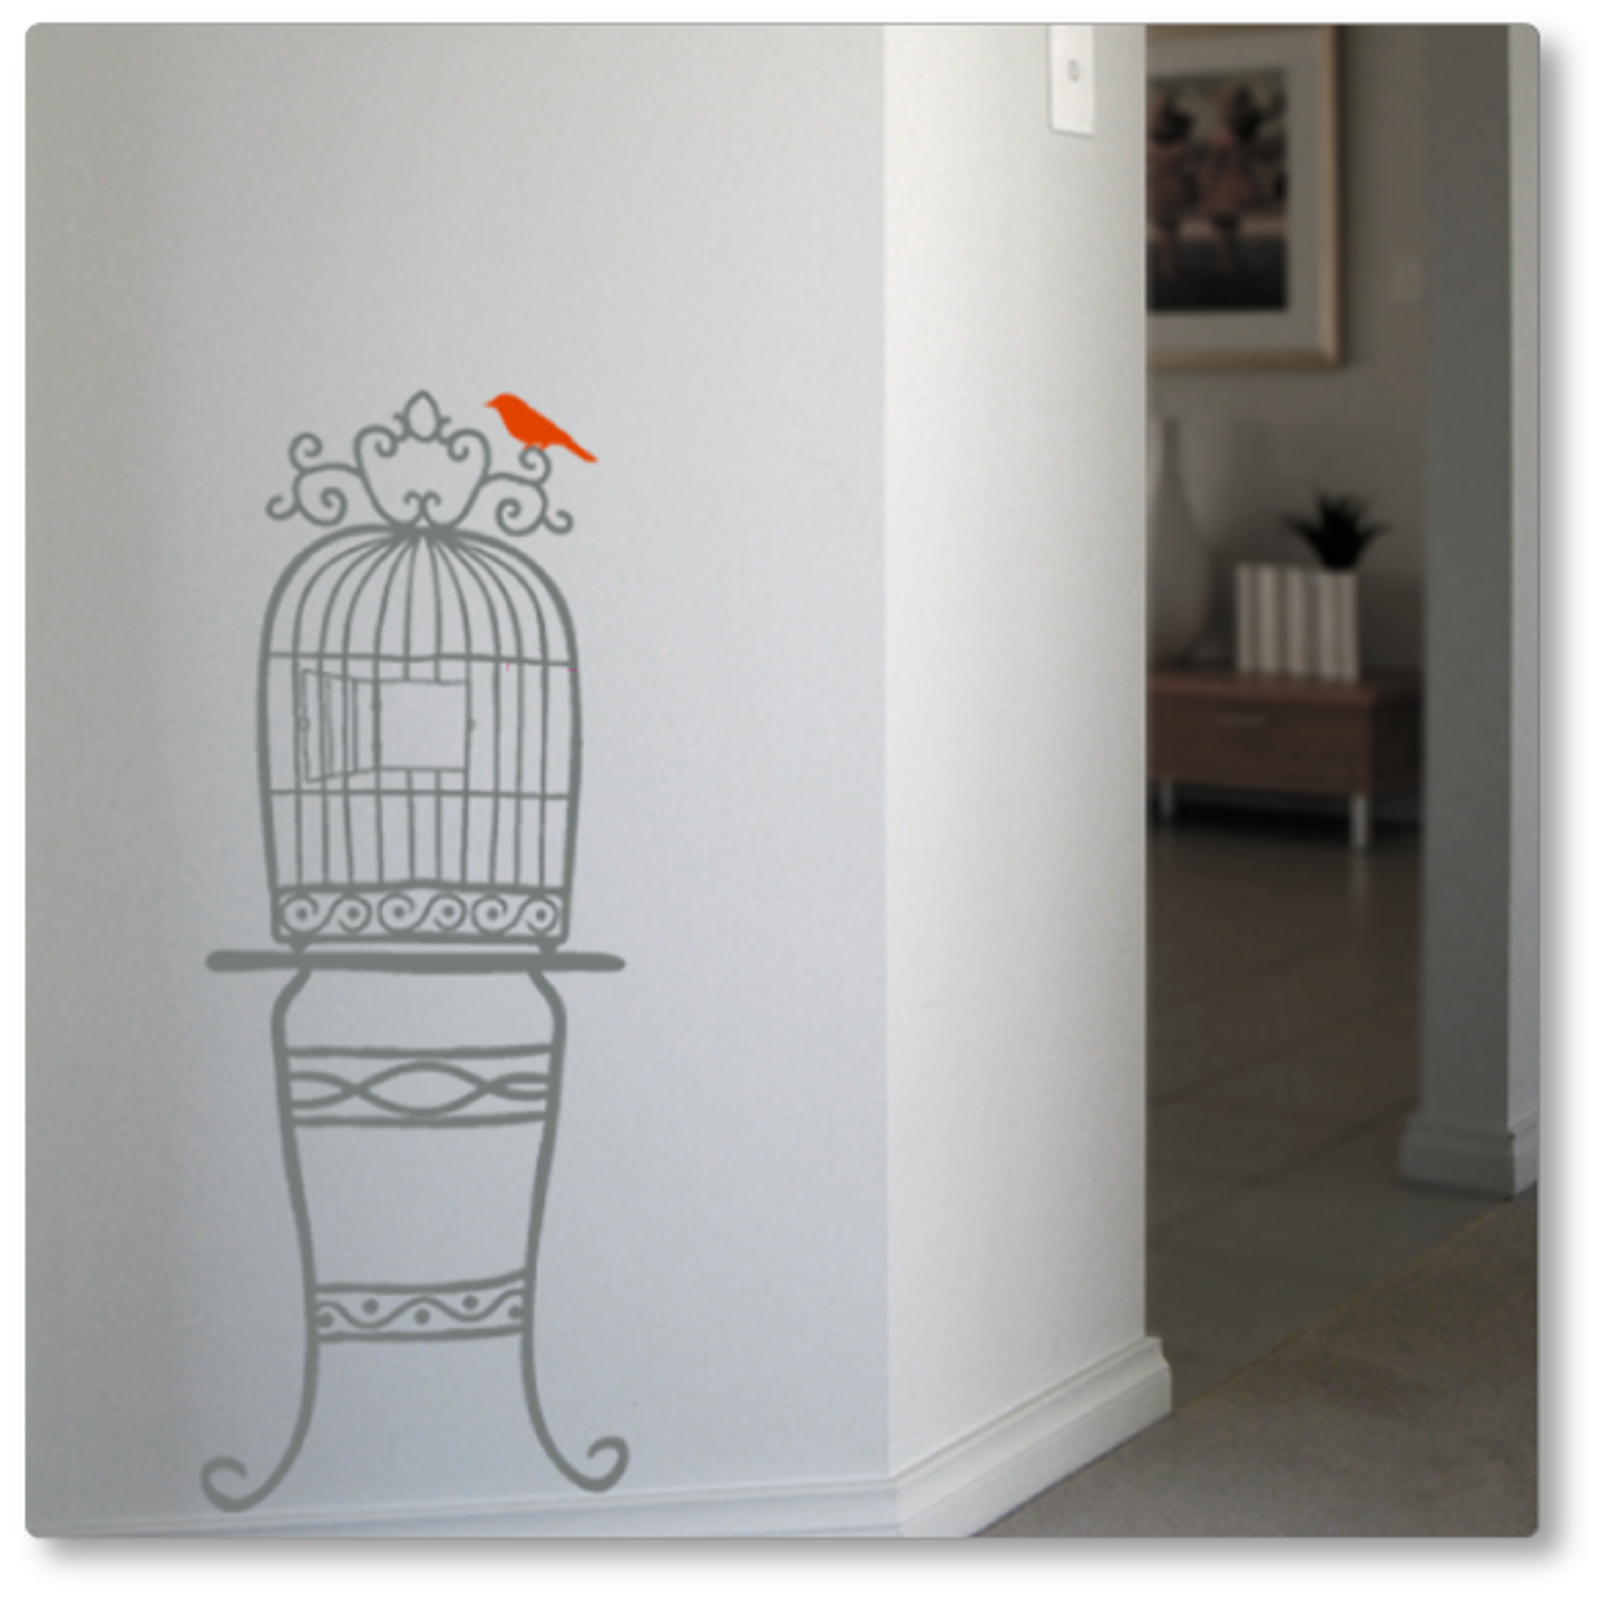 Our quirky birdcage on a table was adapted from a hand drawn image. It adds flair to any wall. Shown in grey, red bird, on a neutral wall.